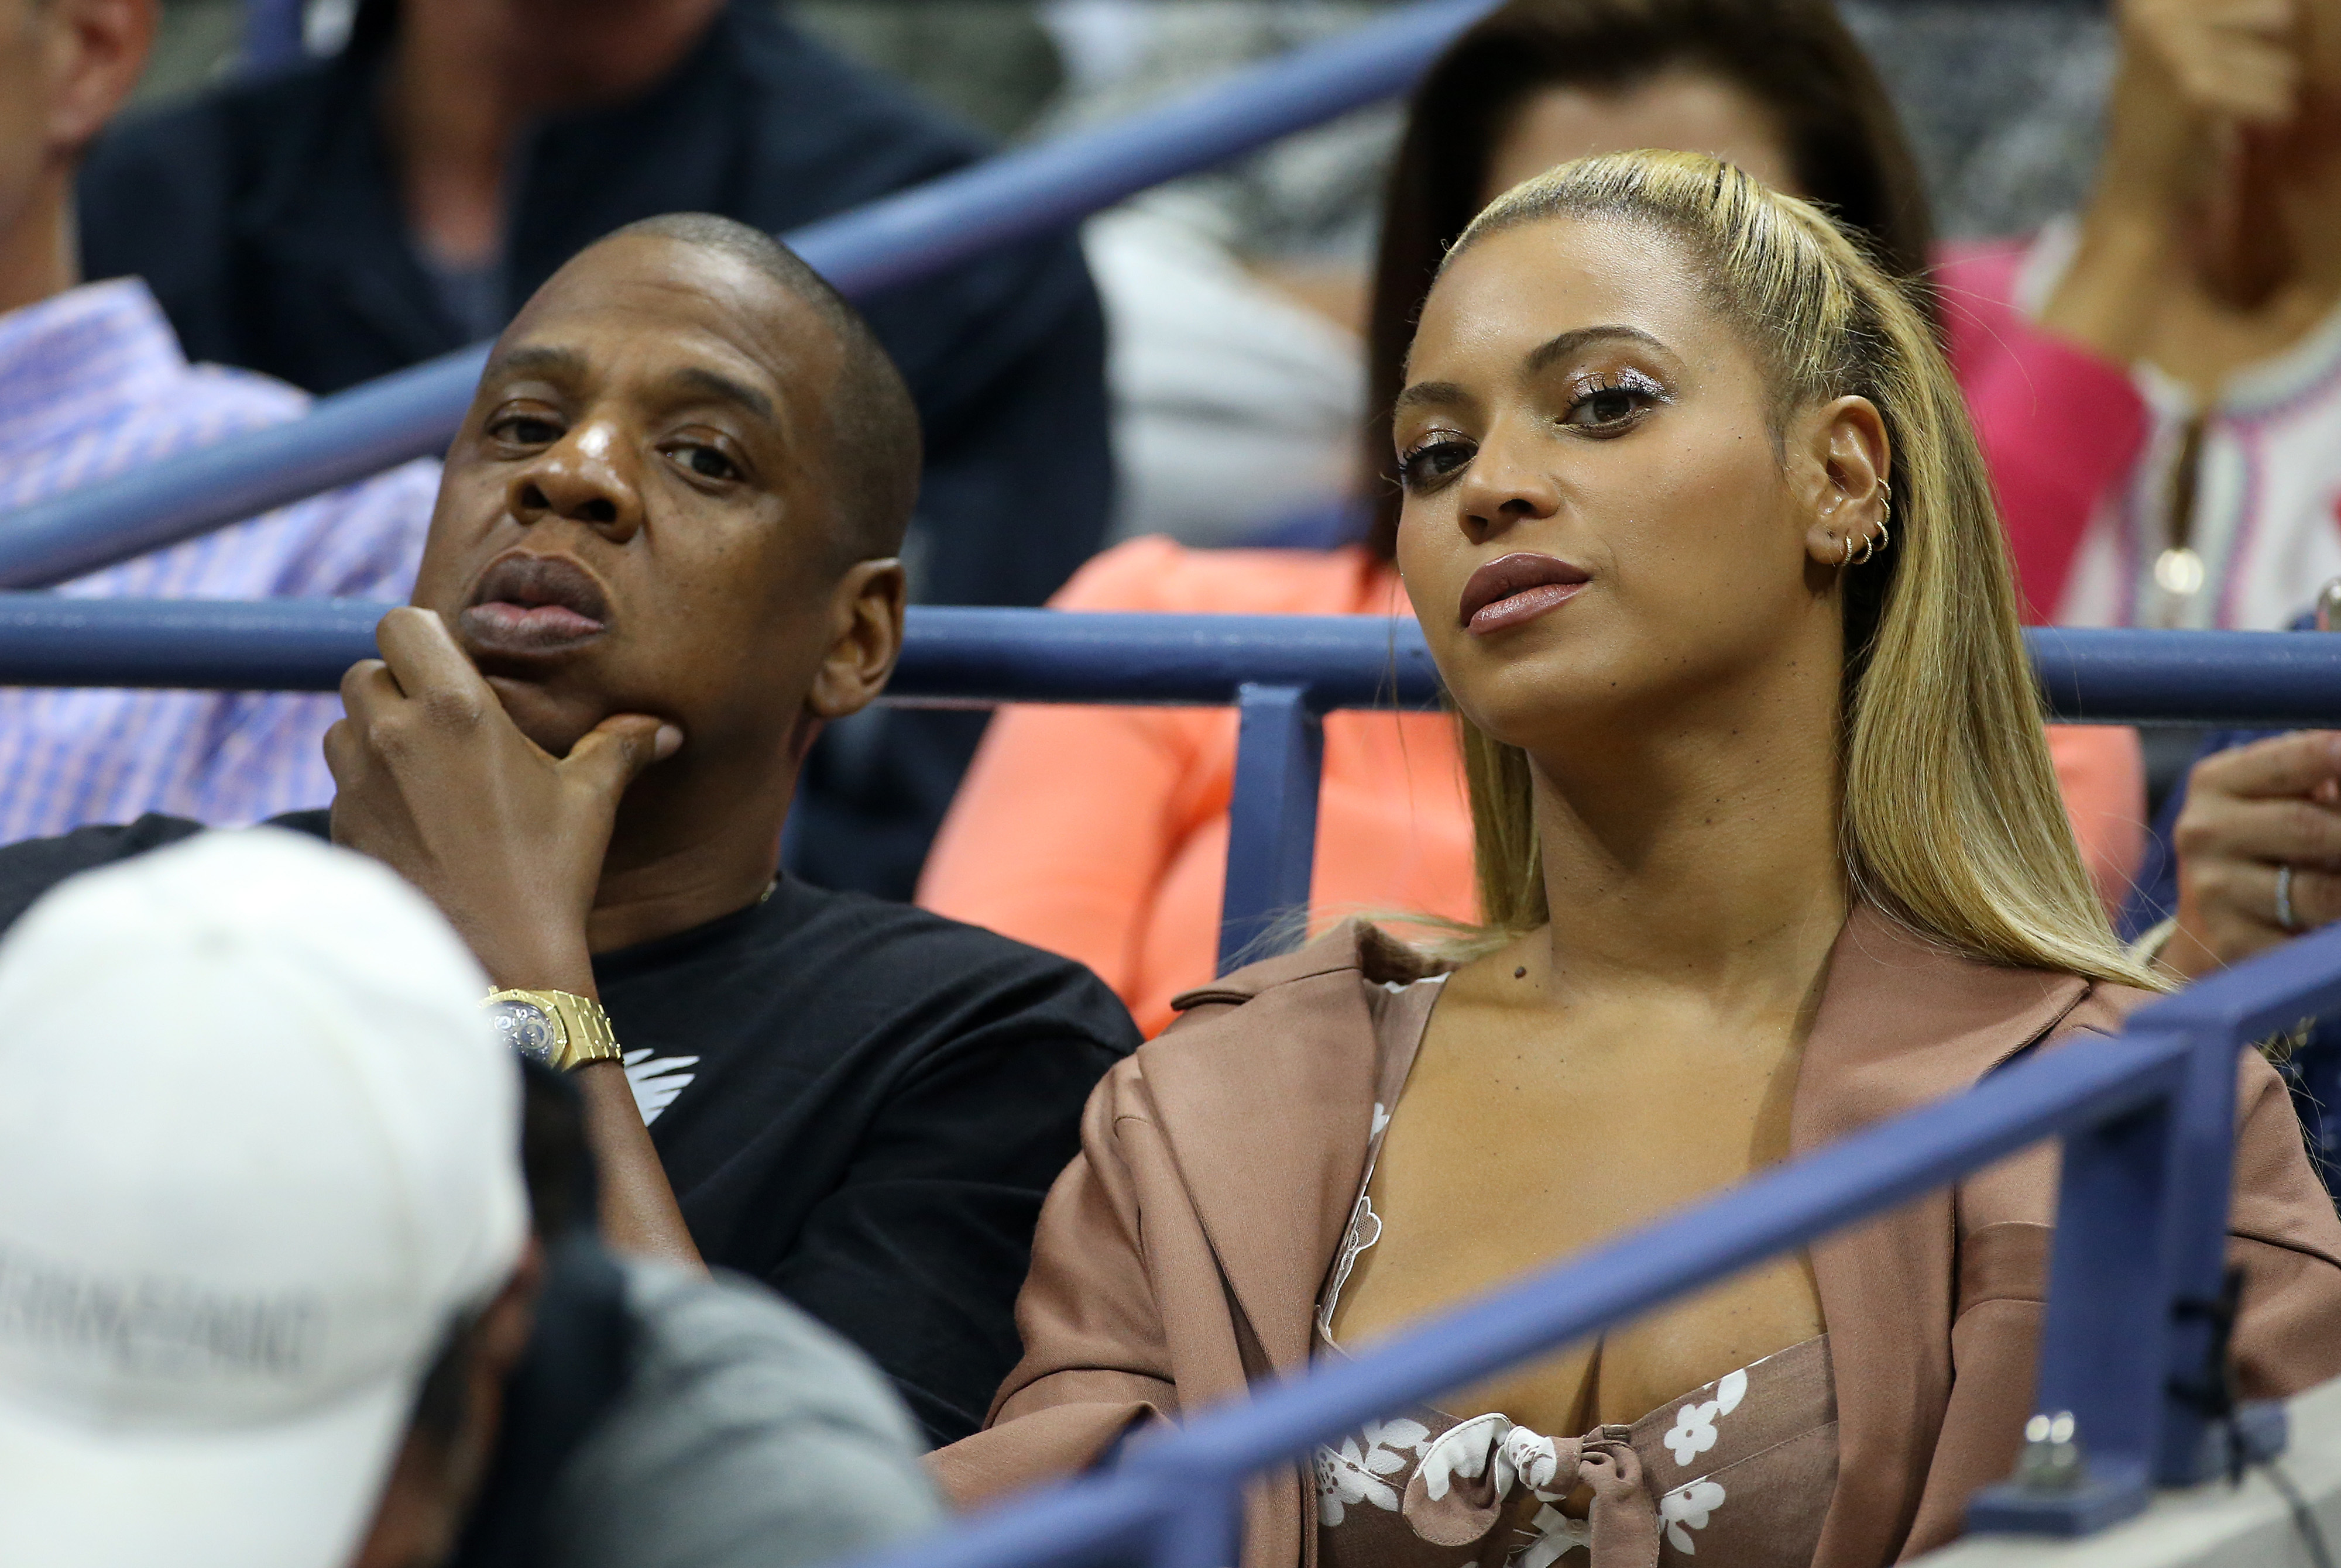  Jay-Z and Beyoncé at a sporting event